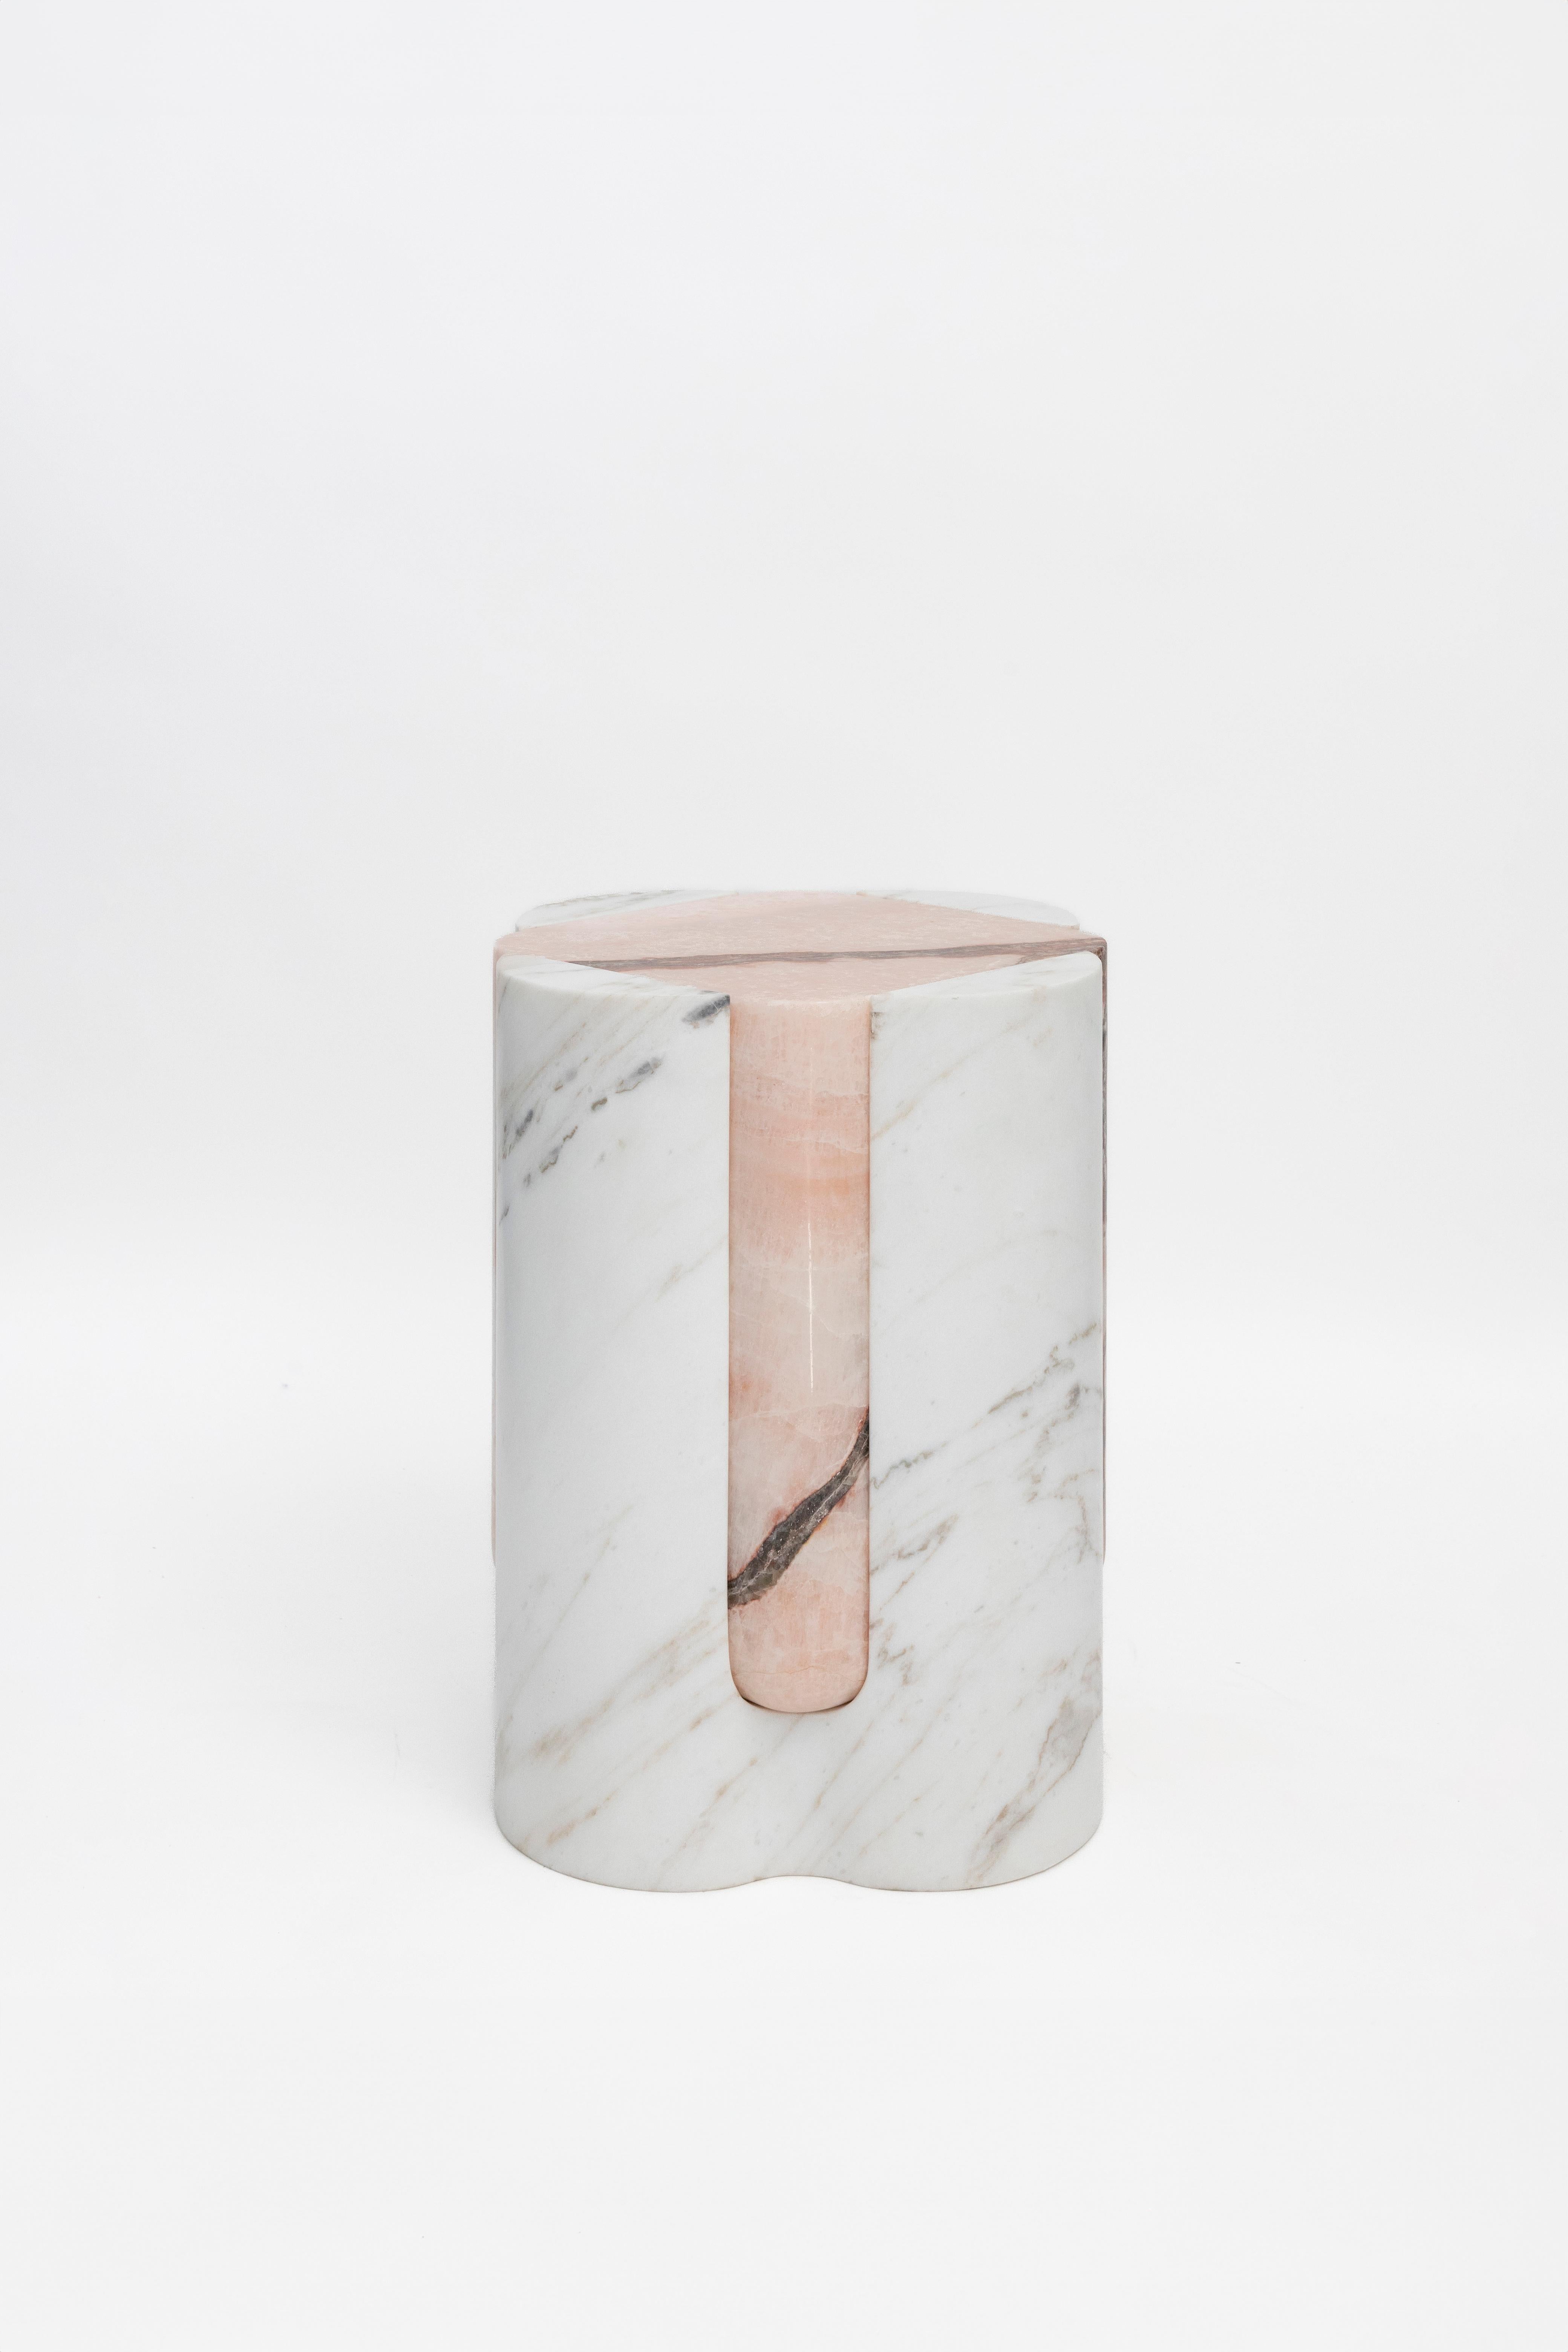 Materials:Golden Calacatta marble and pink onyx

While, in principle, marble bears not a volcanic origin, the veiny, fine-grained Yule marble employed for this variation of Sten Studio’s distinctive stools is quarried from the profound interior of